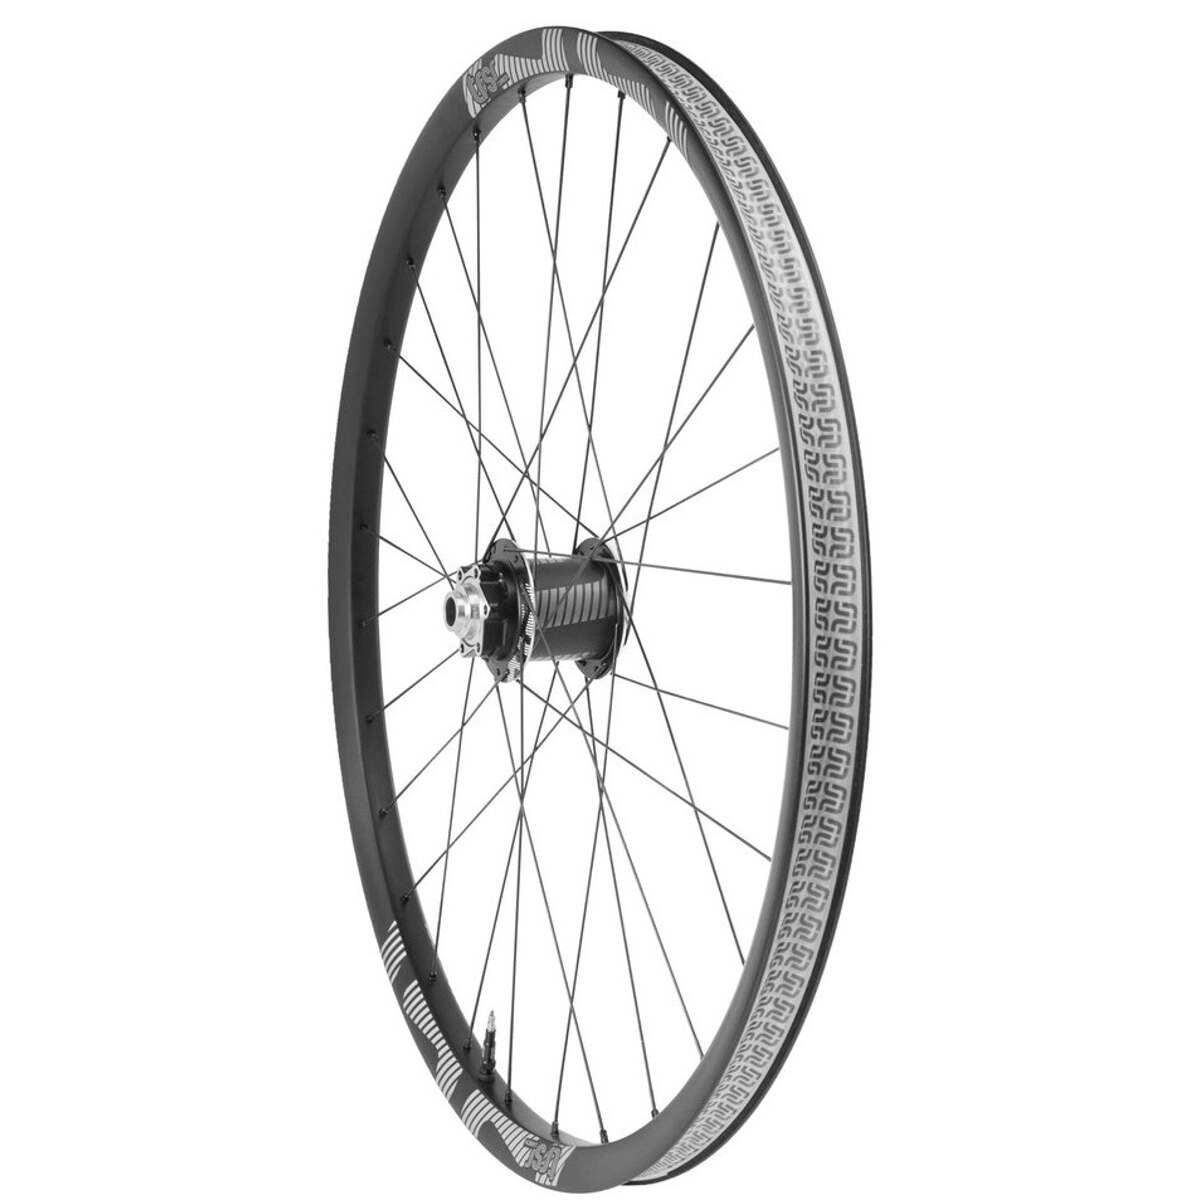 E*thirteen Wheel TRS Race Carbon SL Front, 29 Inches, 110x15 mm, Boost, 28 mm, tubeless ready, Black